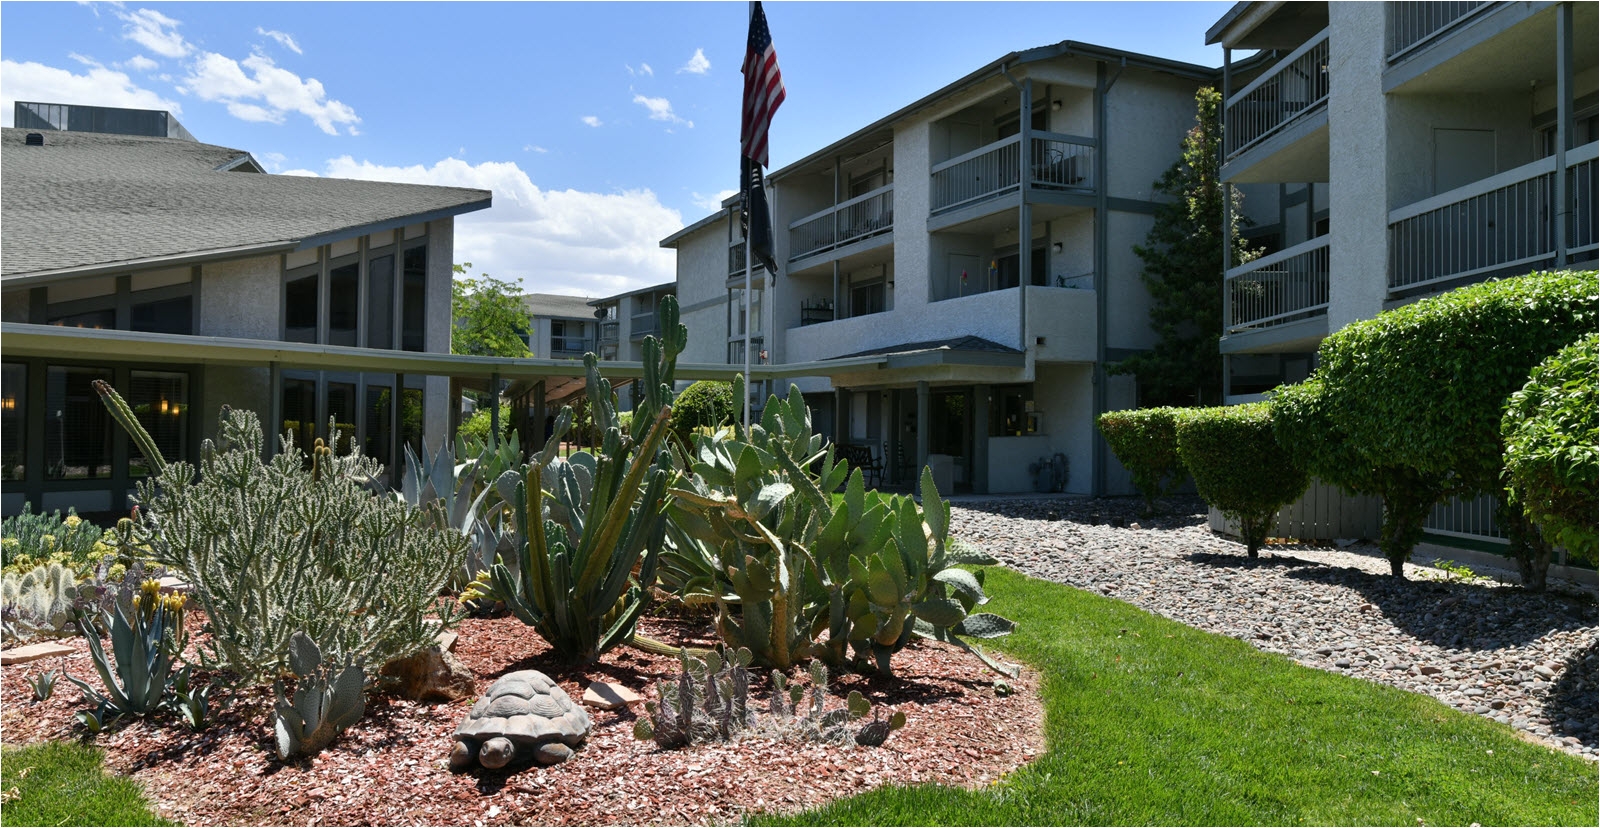 maintained landscape at montara meadows retirement community